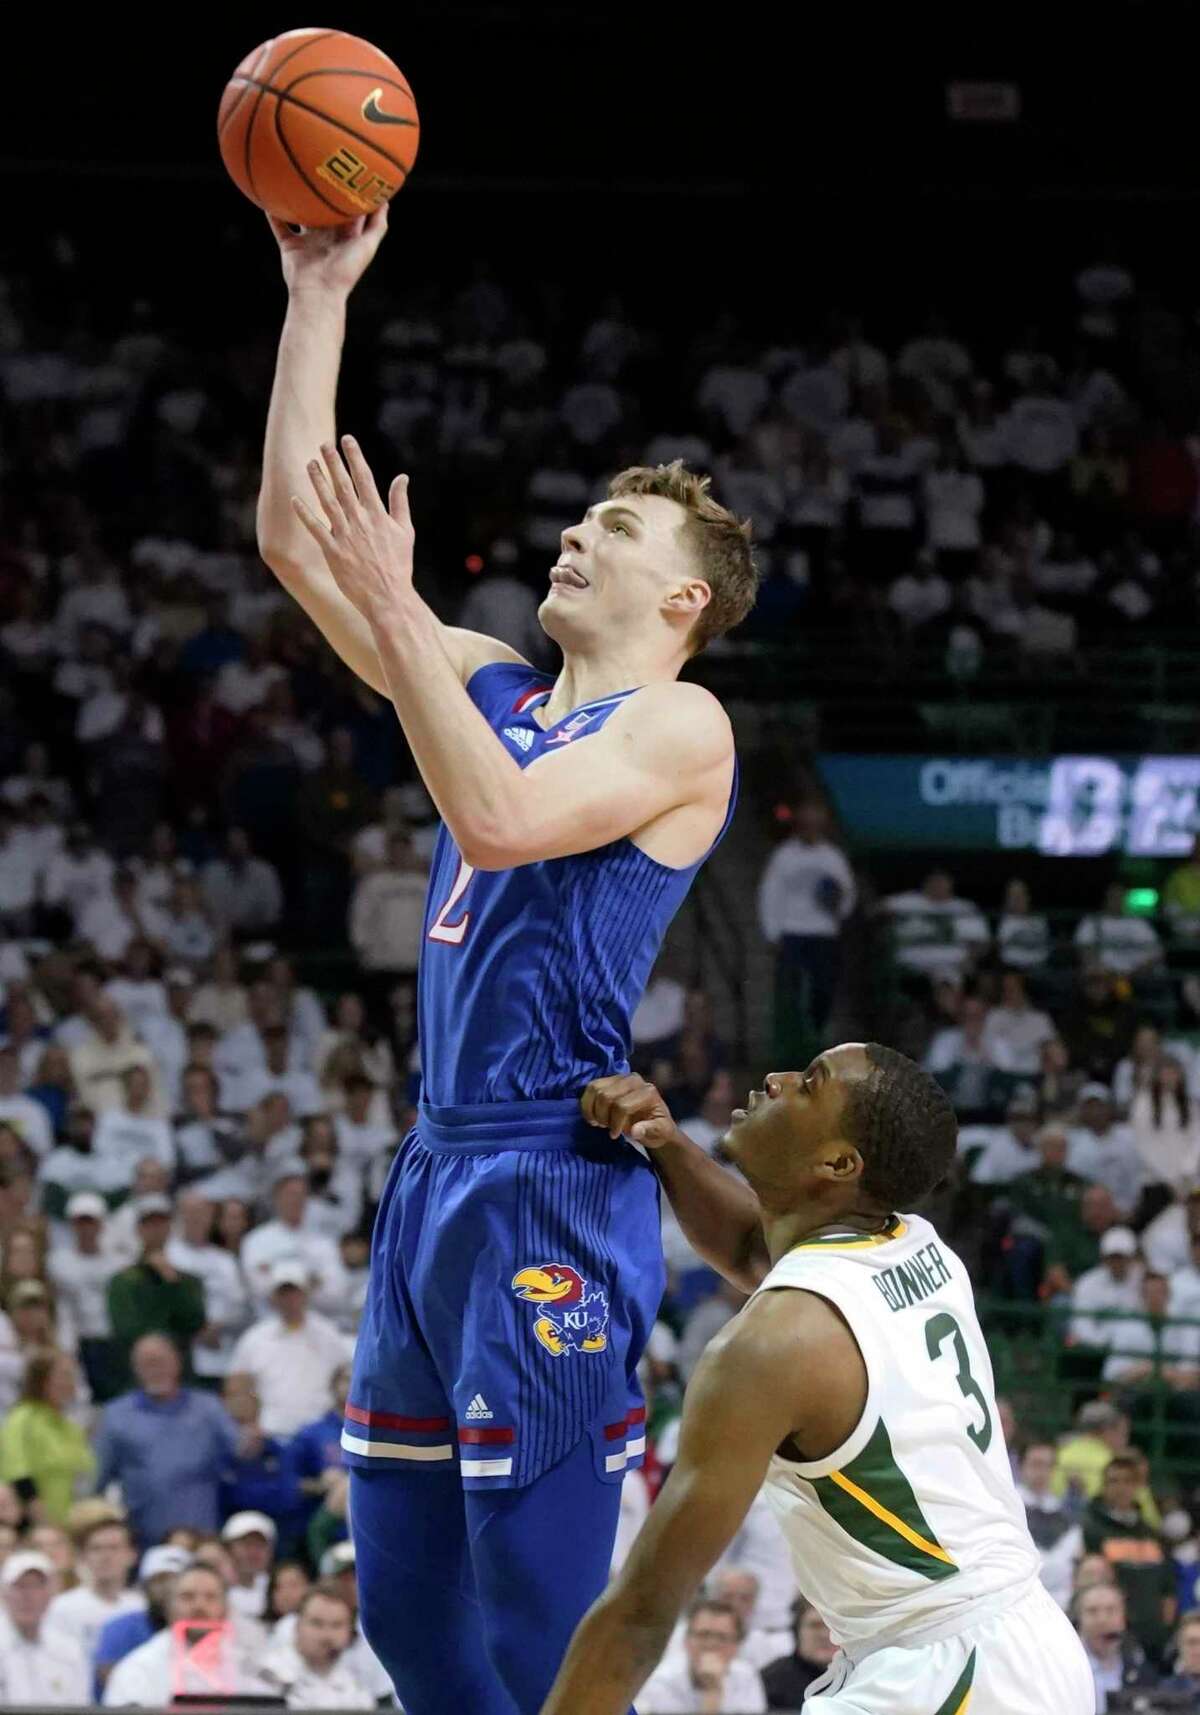 Kansas guard Christian Braun shoots next to Baylor guard Dale Bonner during the first half of an NCAA college basketball game Saturday, Feb. 26, 2022, in Waco, Texas.